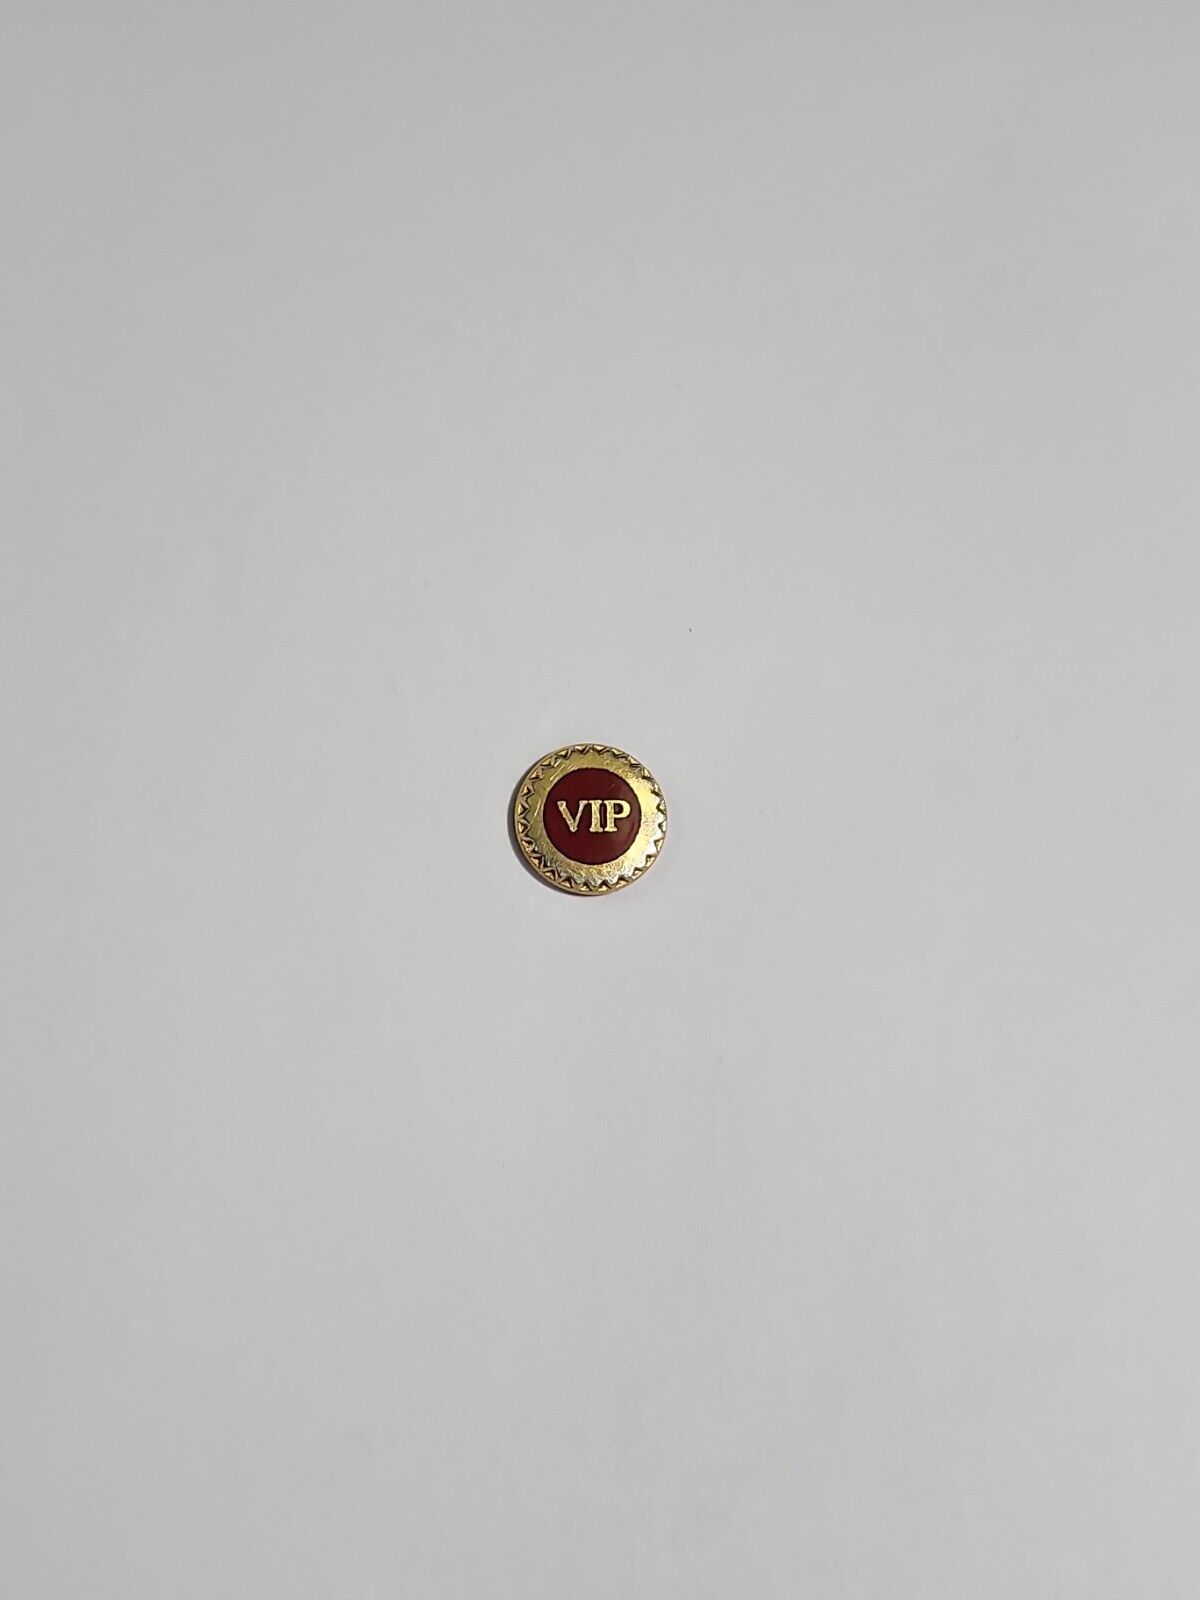 VIP Tie Tack Pin Very Small Maroon & Gold Color Metal Very Important Person